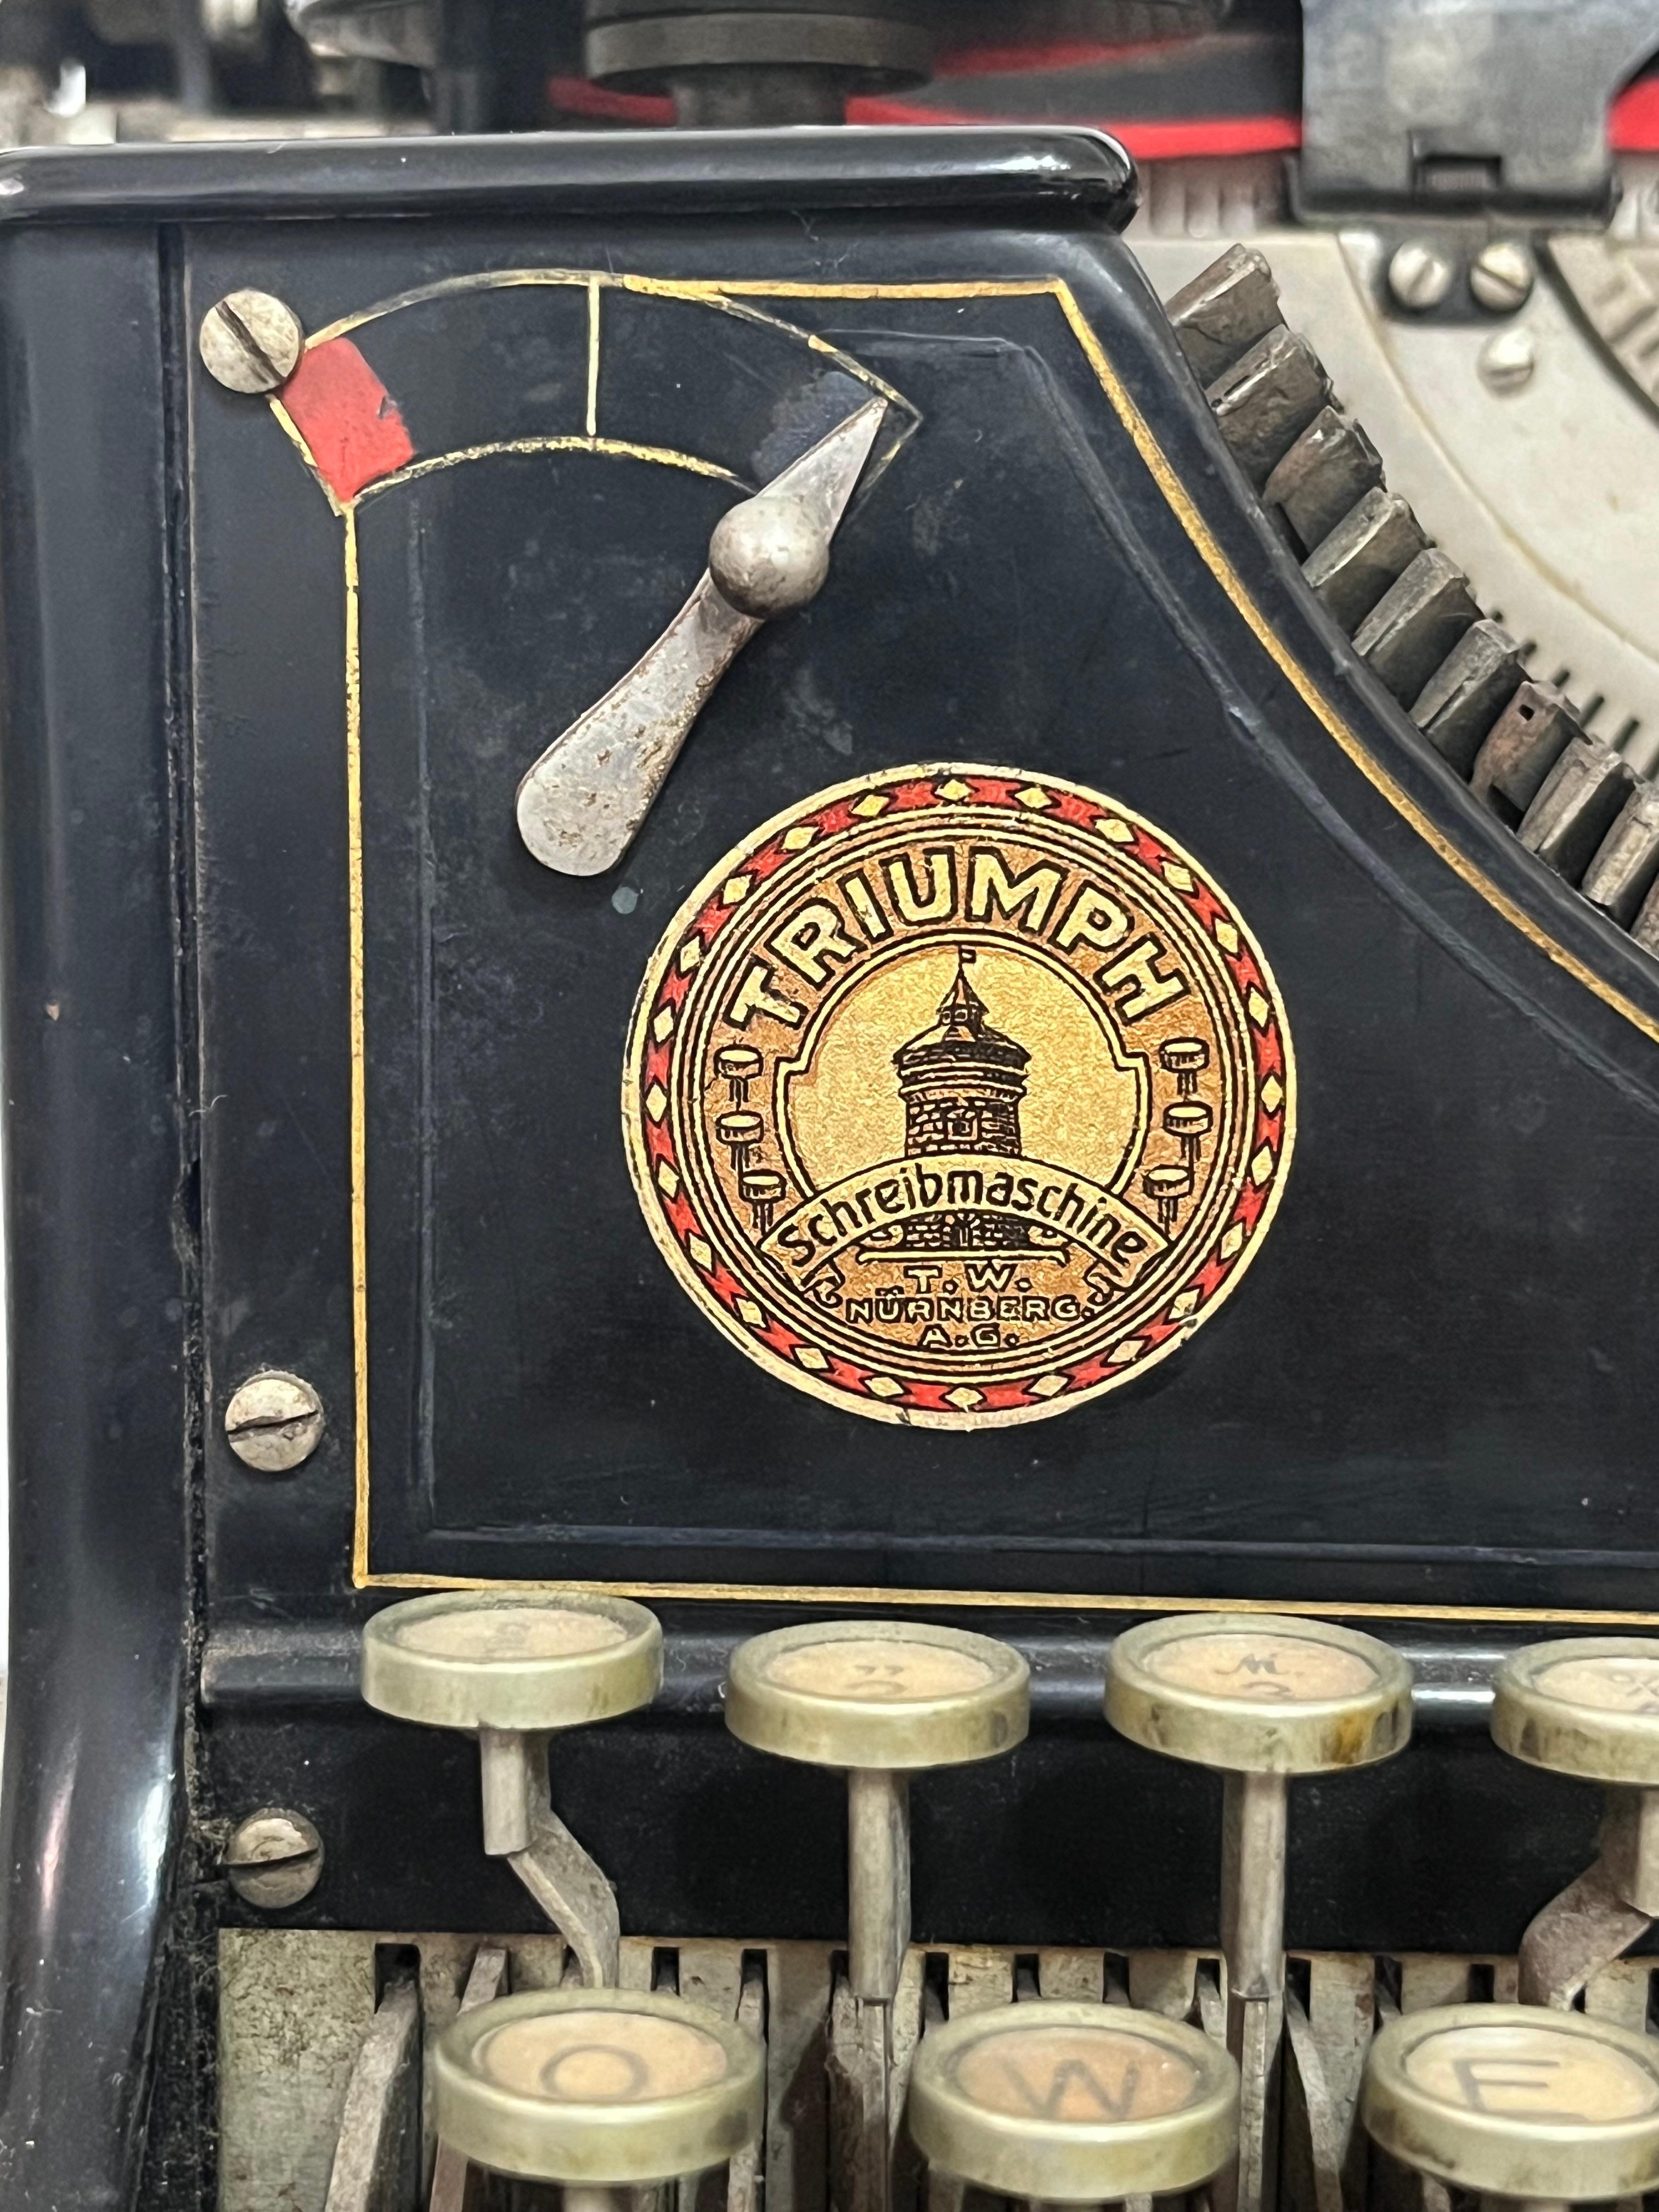 Triumph typewriter, Germany, 1930
Found in a notary's office, signs of aging.